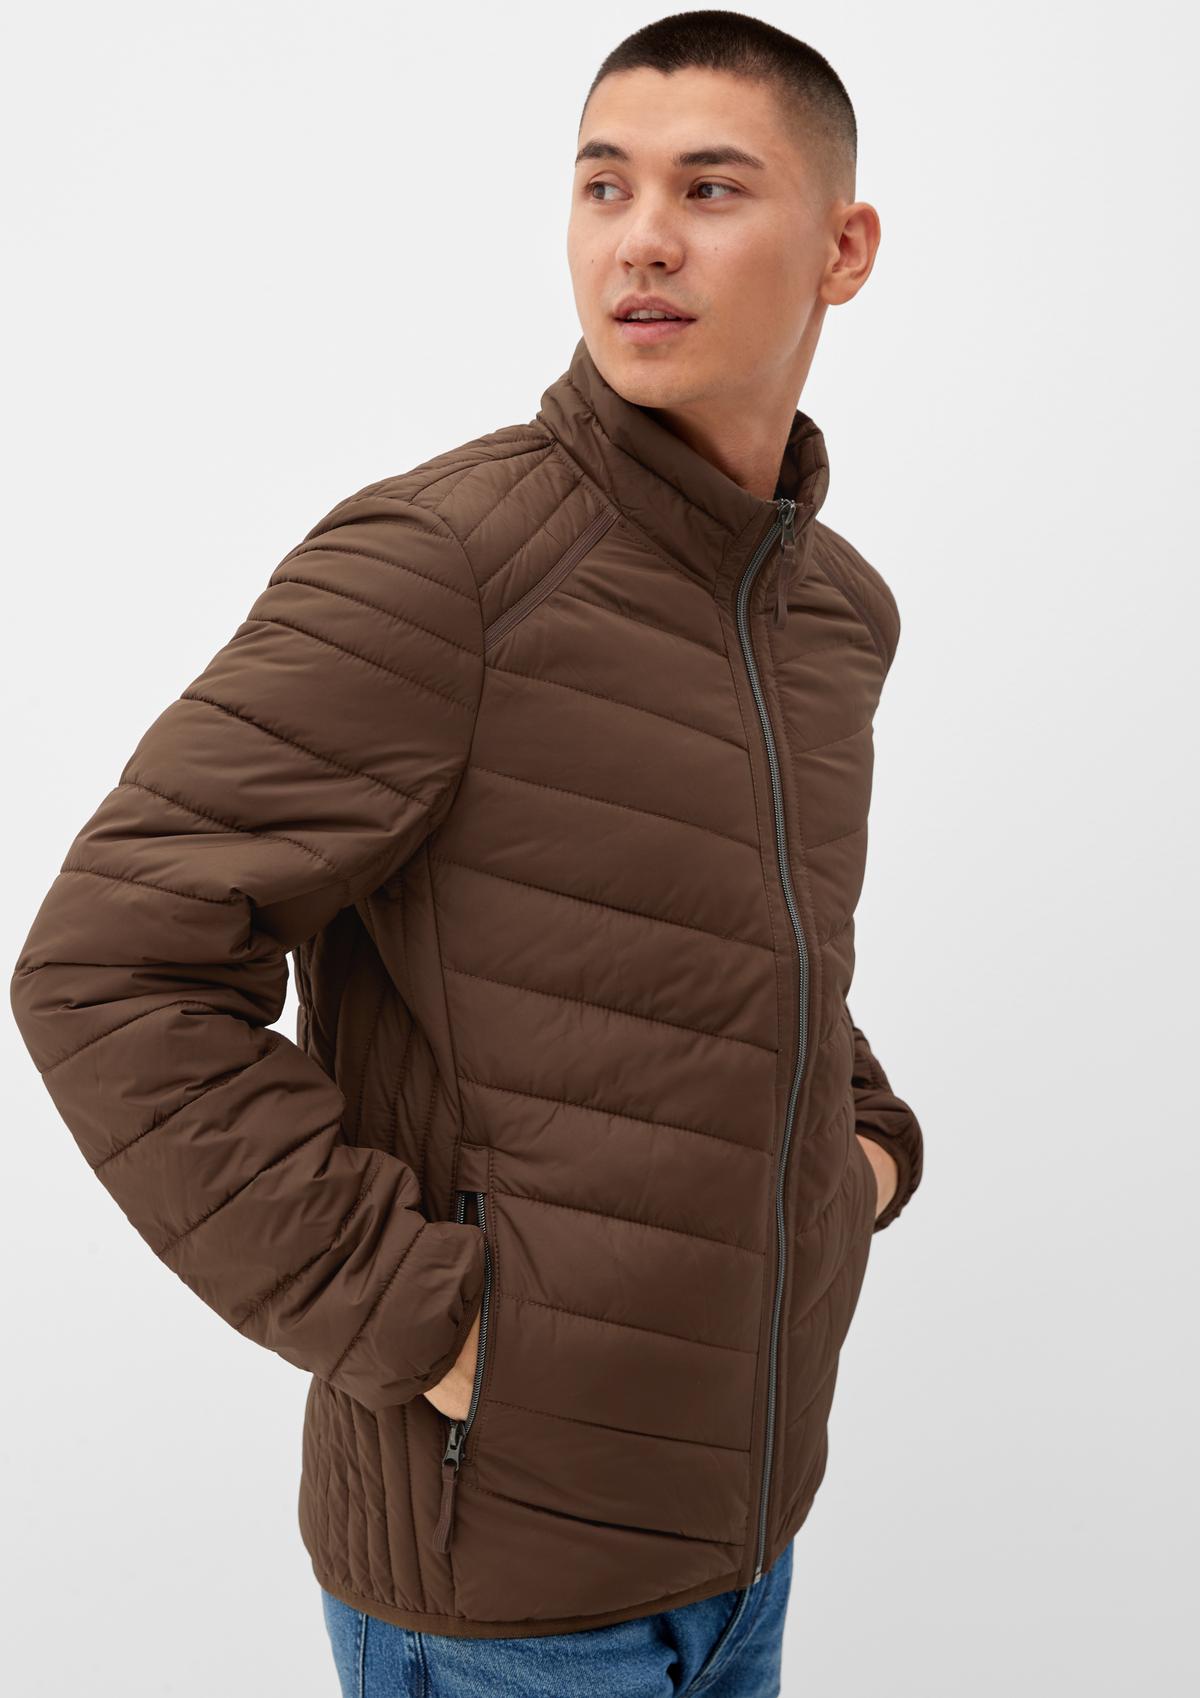 Lightweight quilted jacket with a stand-up collar - honey yellow